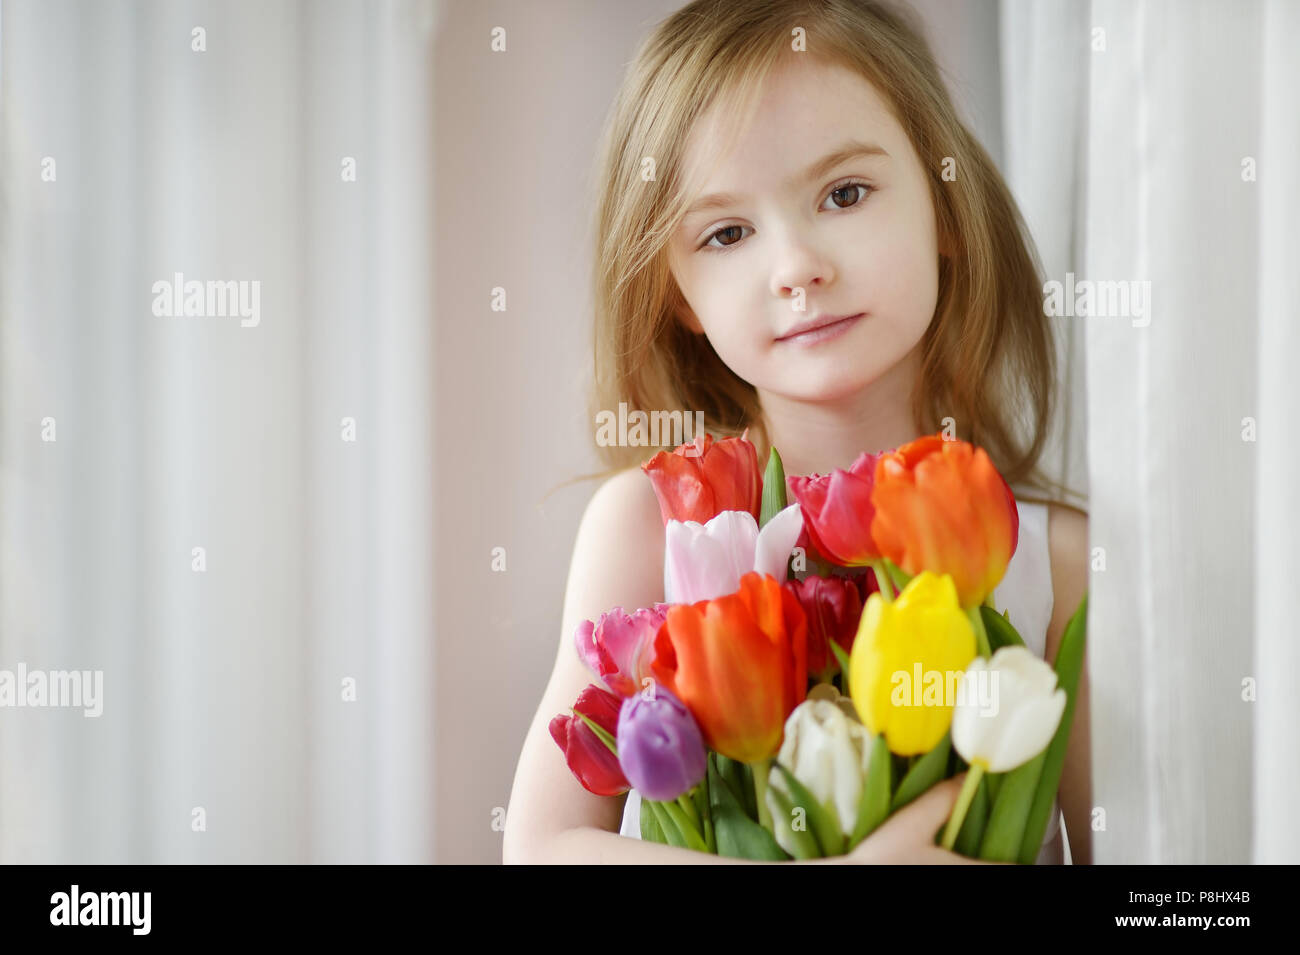 Adorable smiling little girl with tulips by the window Stock Photo